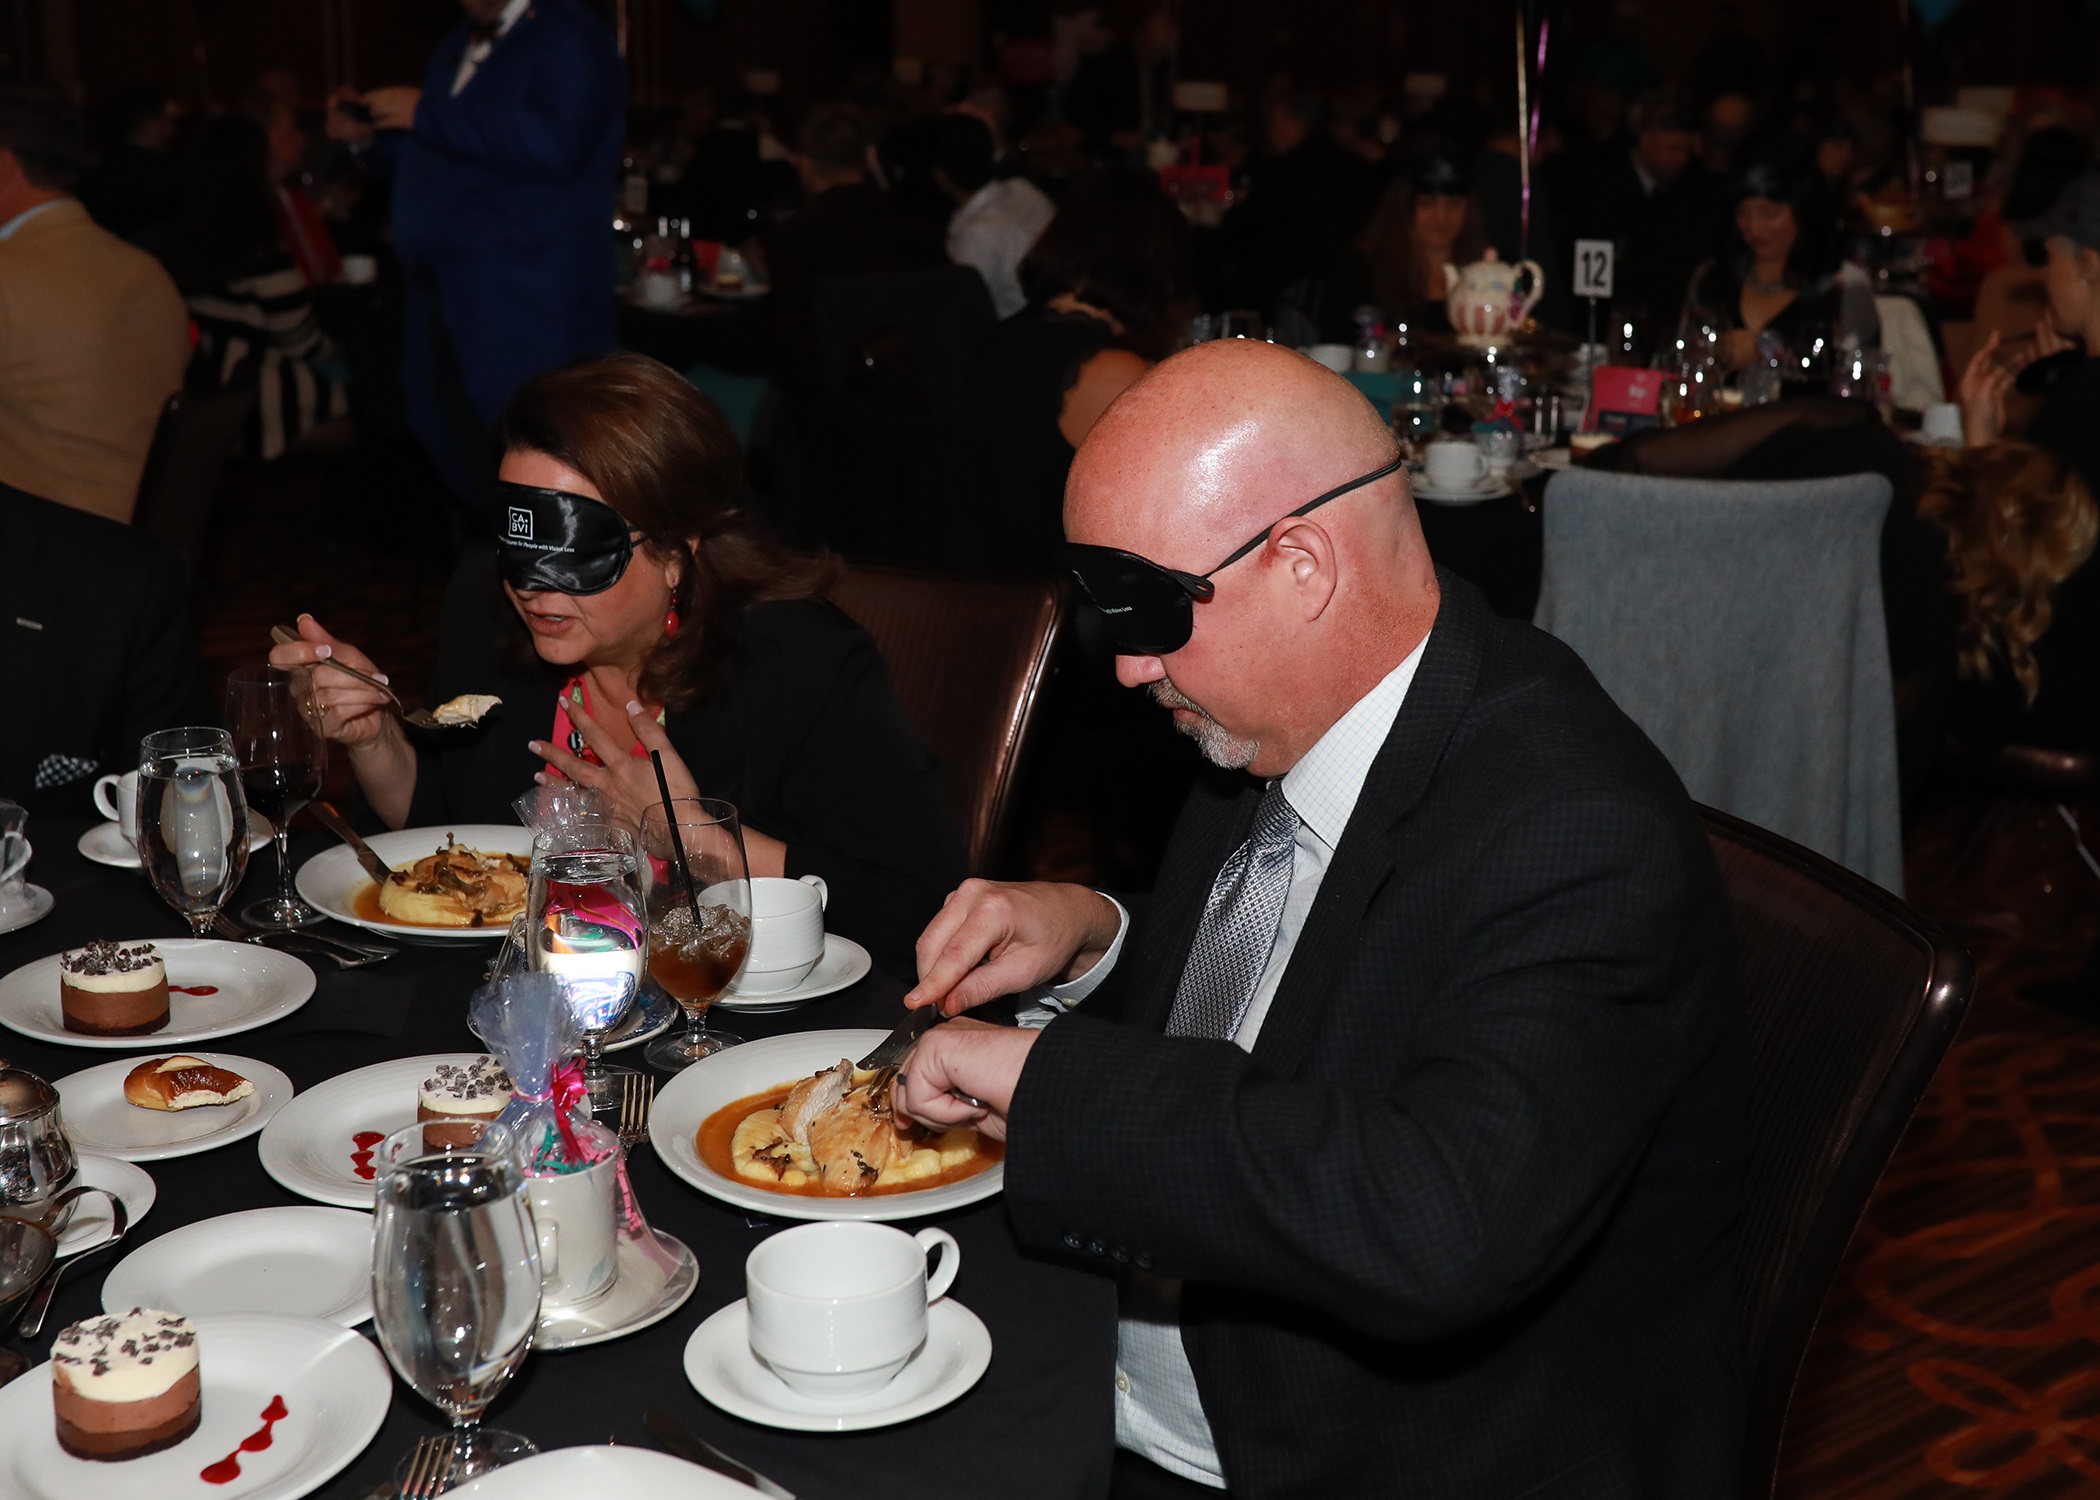 Gentleman at table eating with blindfold